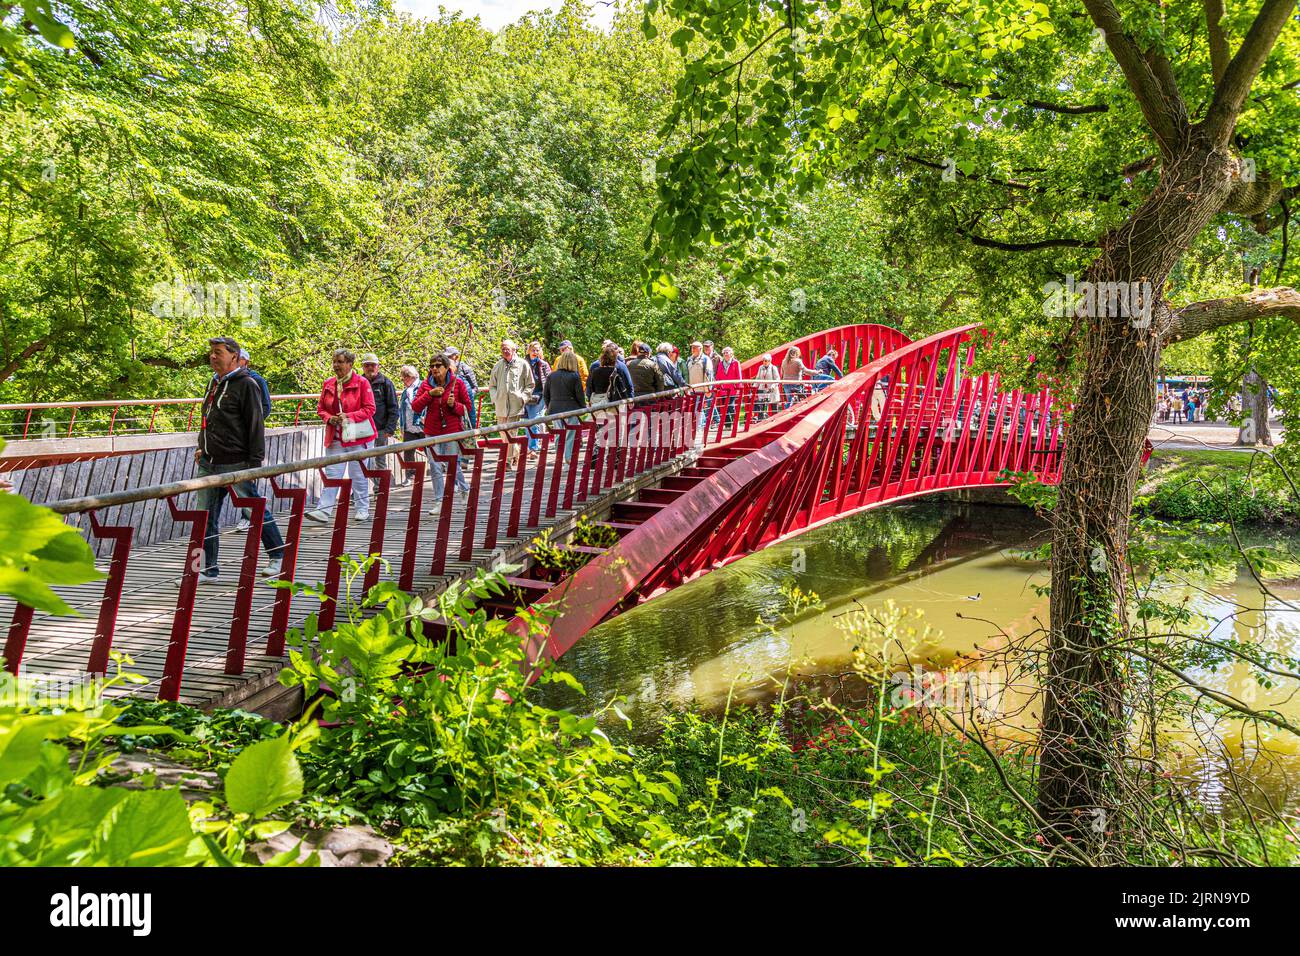 Tourists crossing the Barge Bridge (Bargebrug) connecting Minnewater Park with the outskirts of the city of Bruges, Belgium Stock Photo